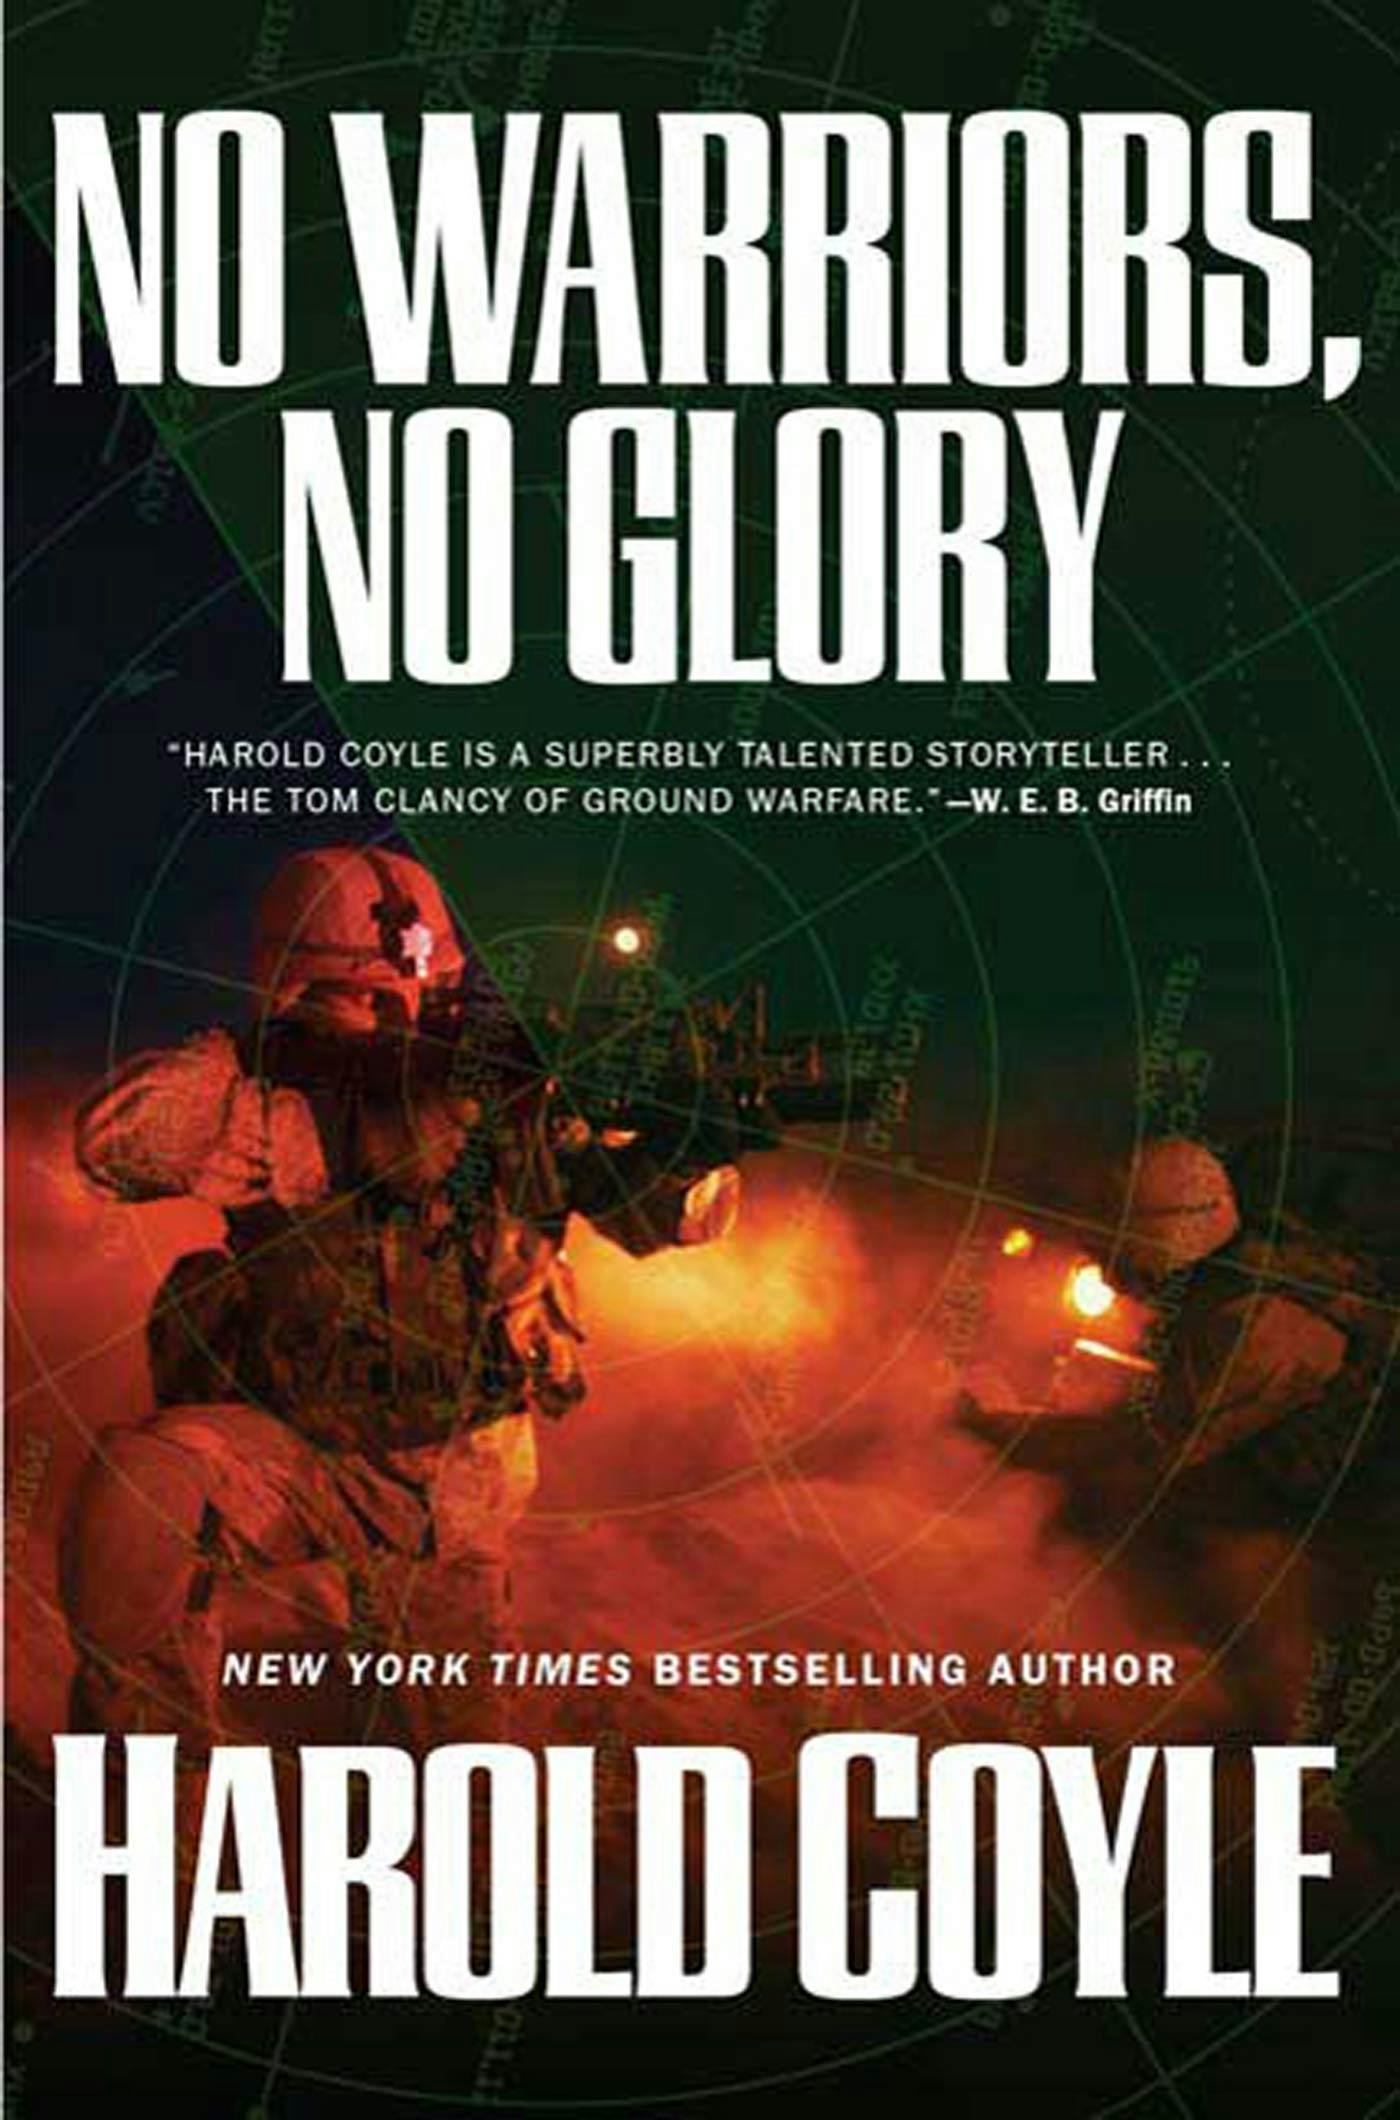 Cover for the book titled as: No Warriors, No Glory